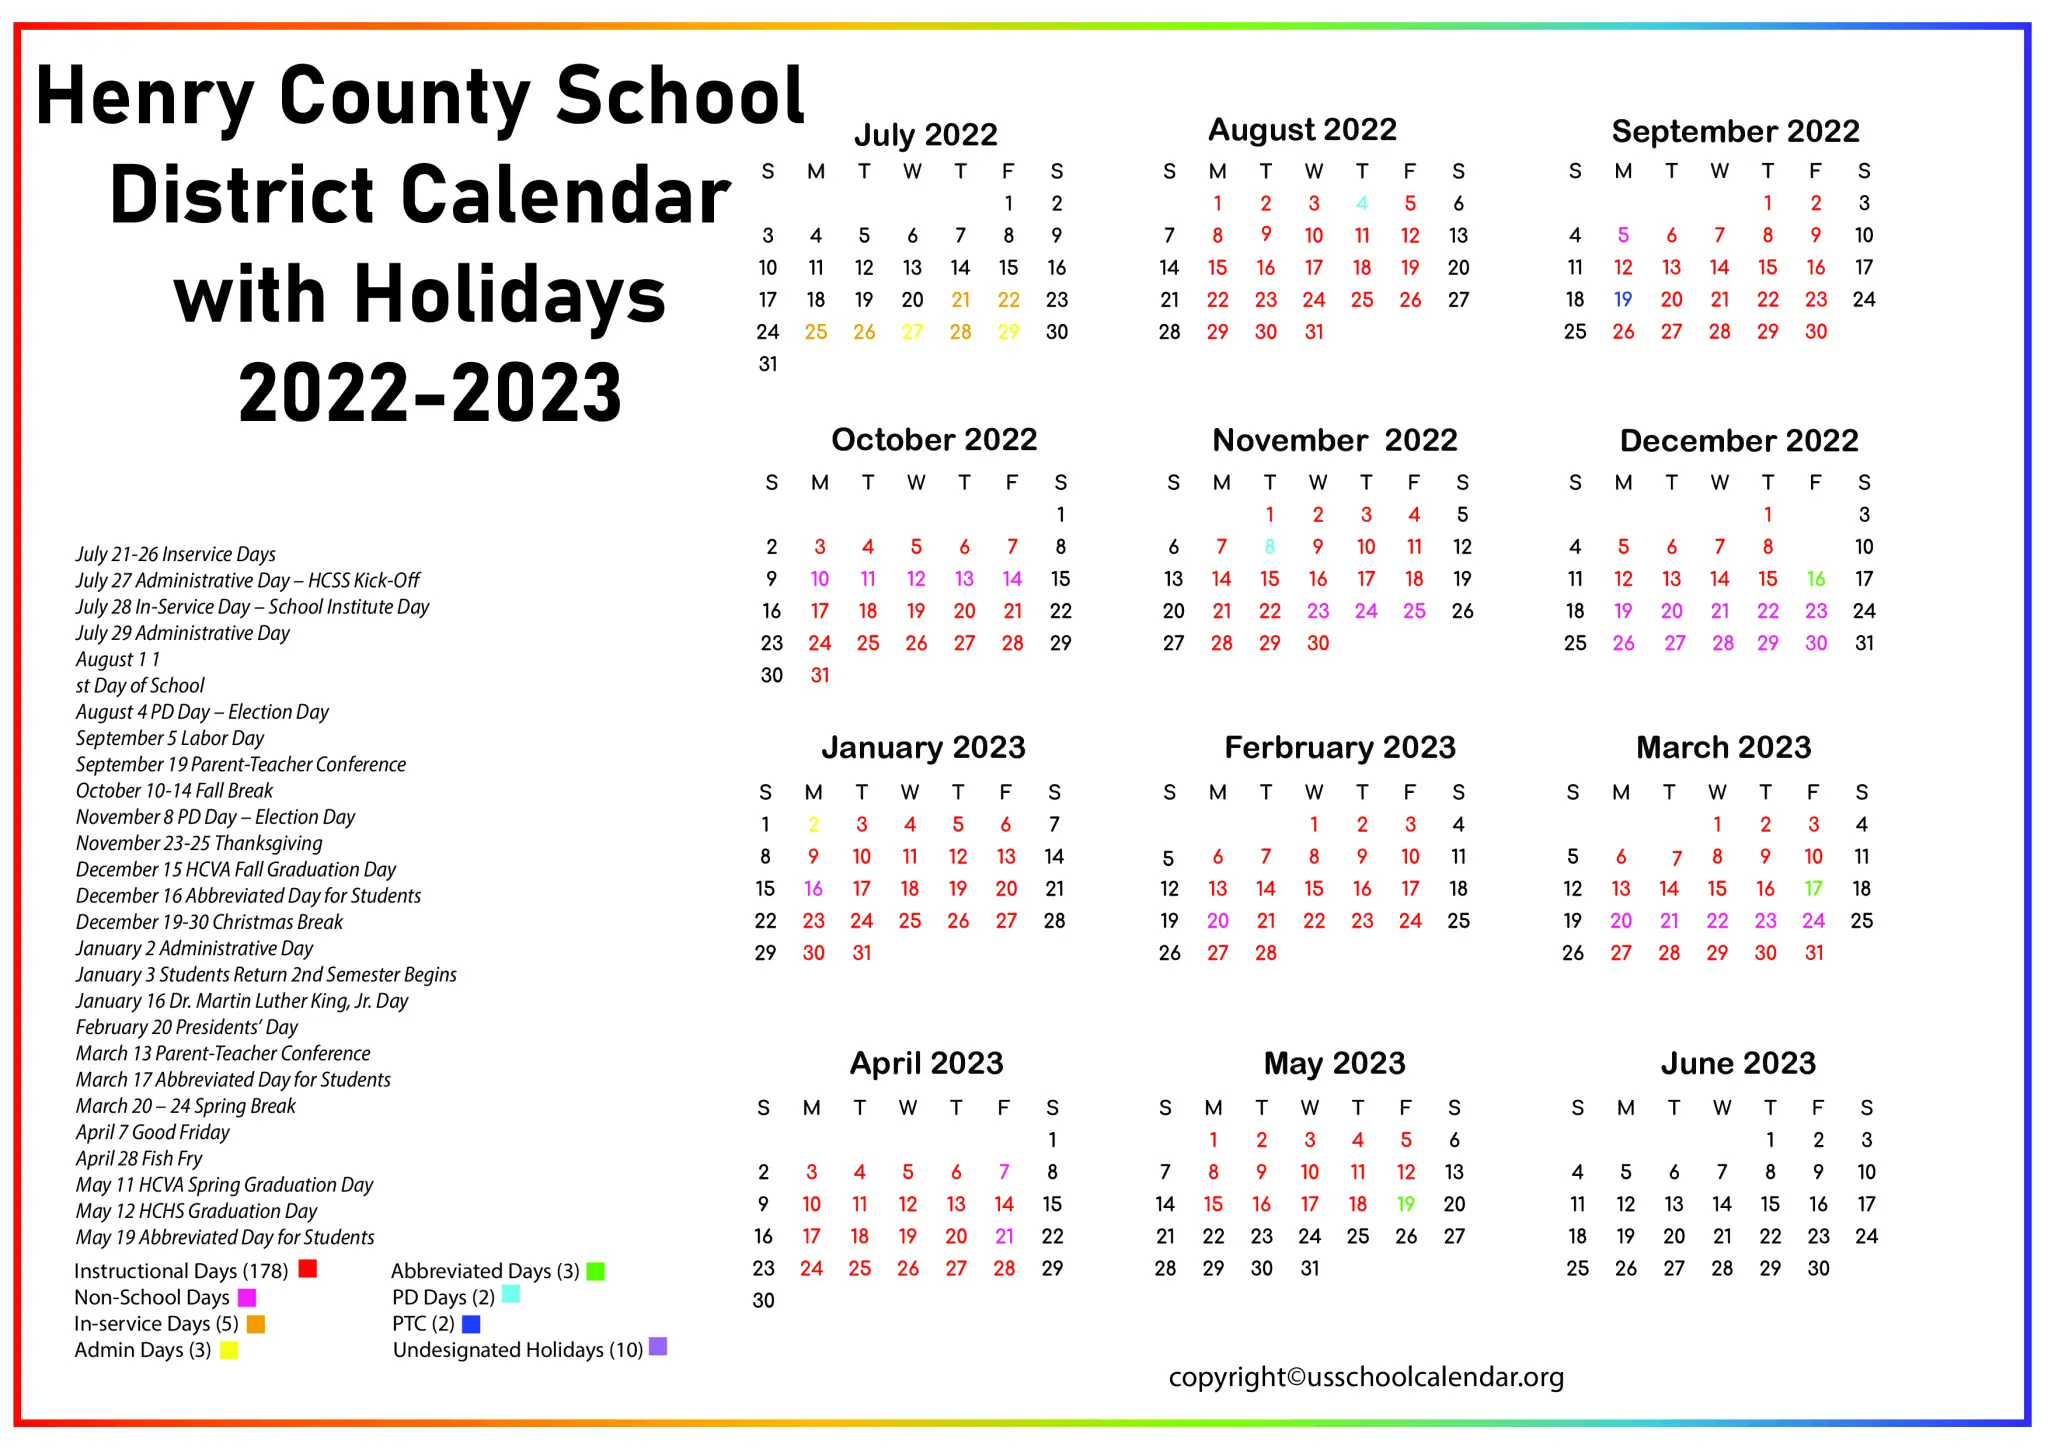 Henry County School District Calendar with Holidays 2023